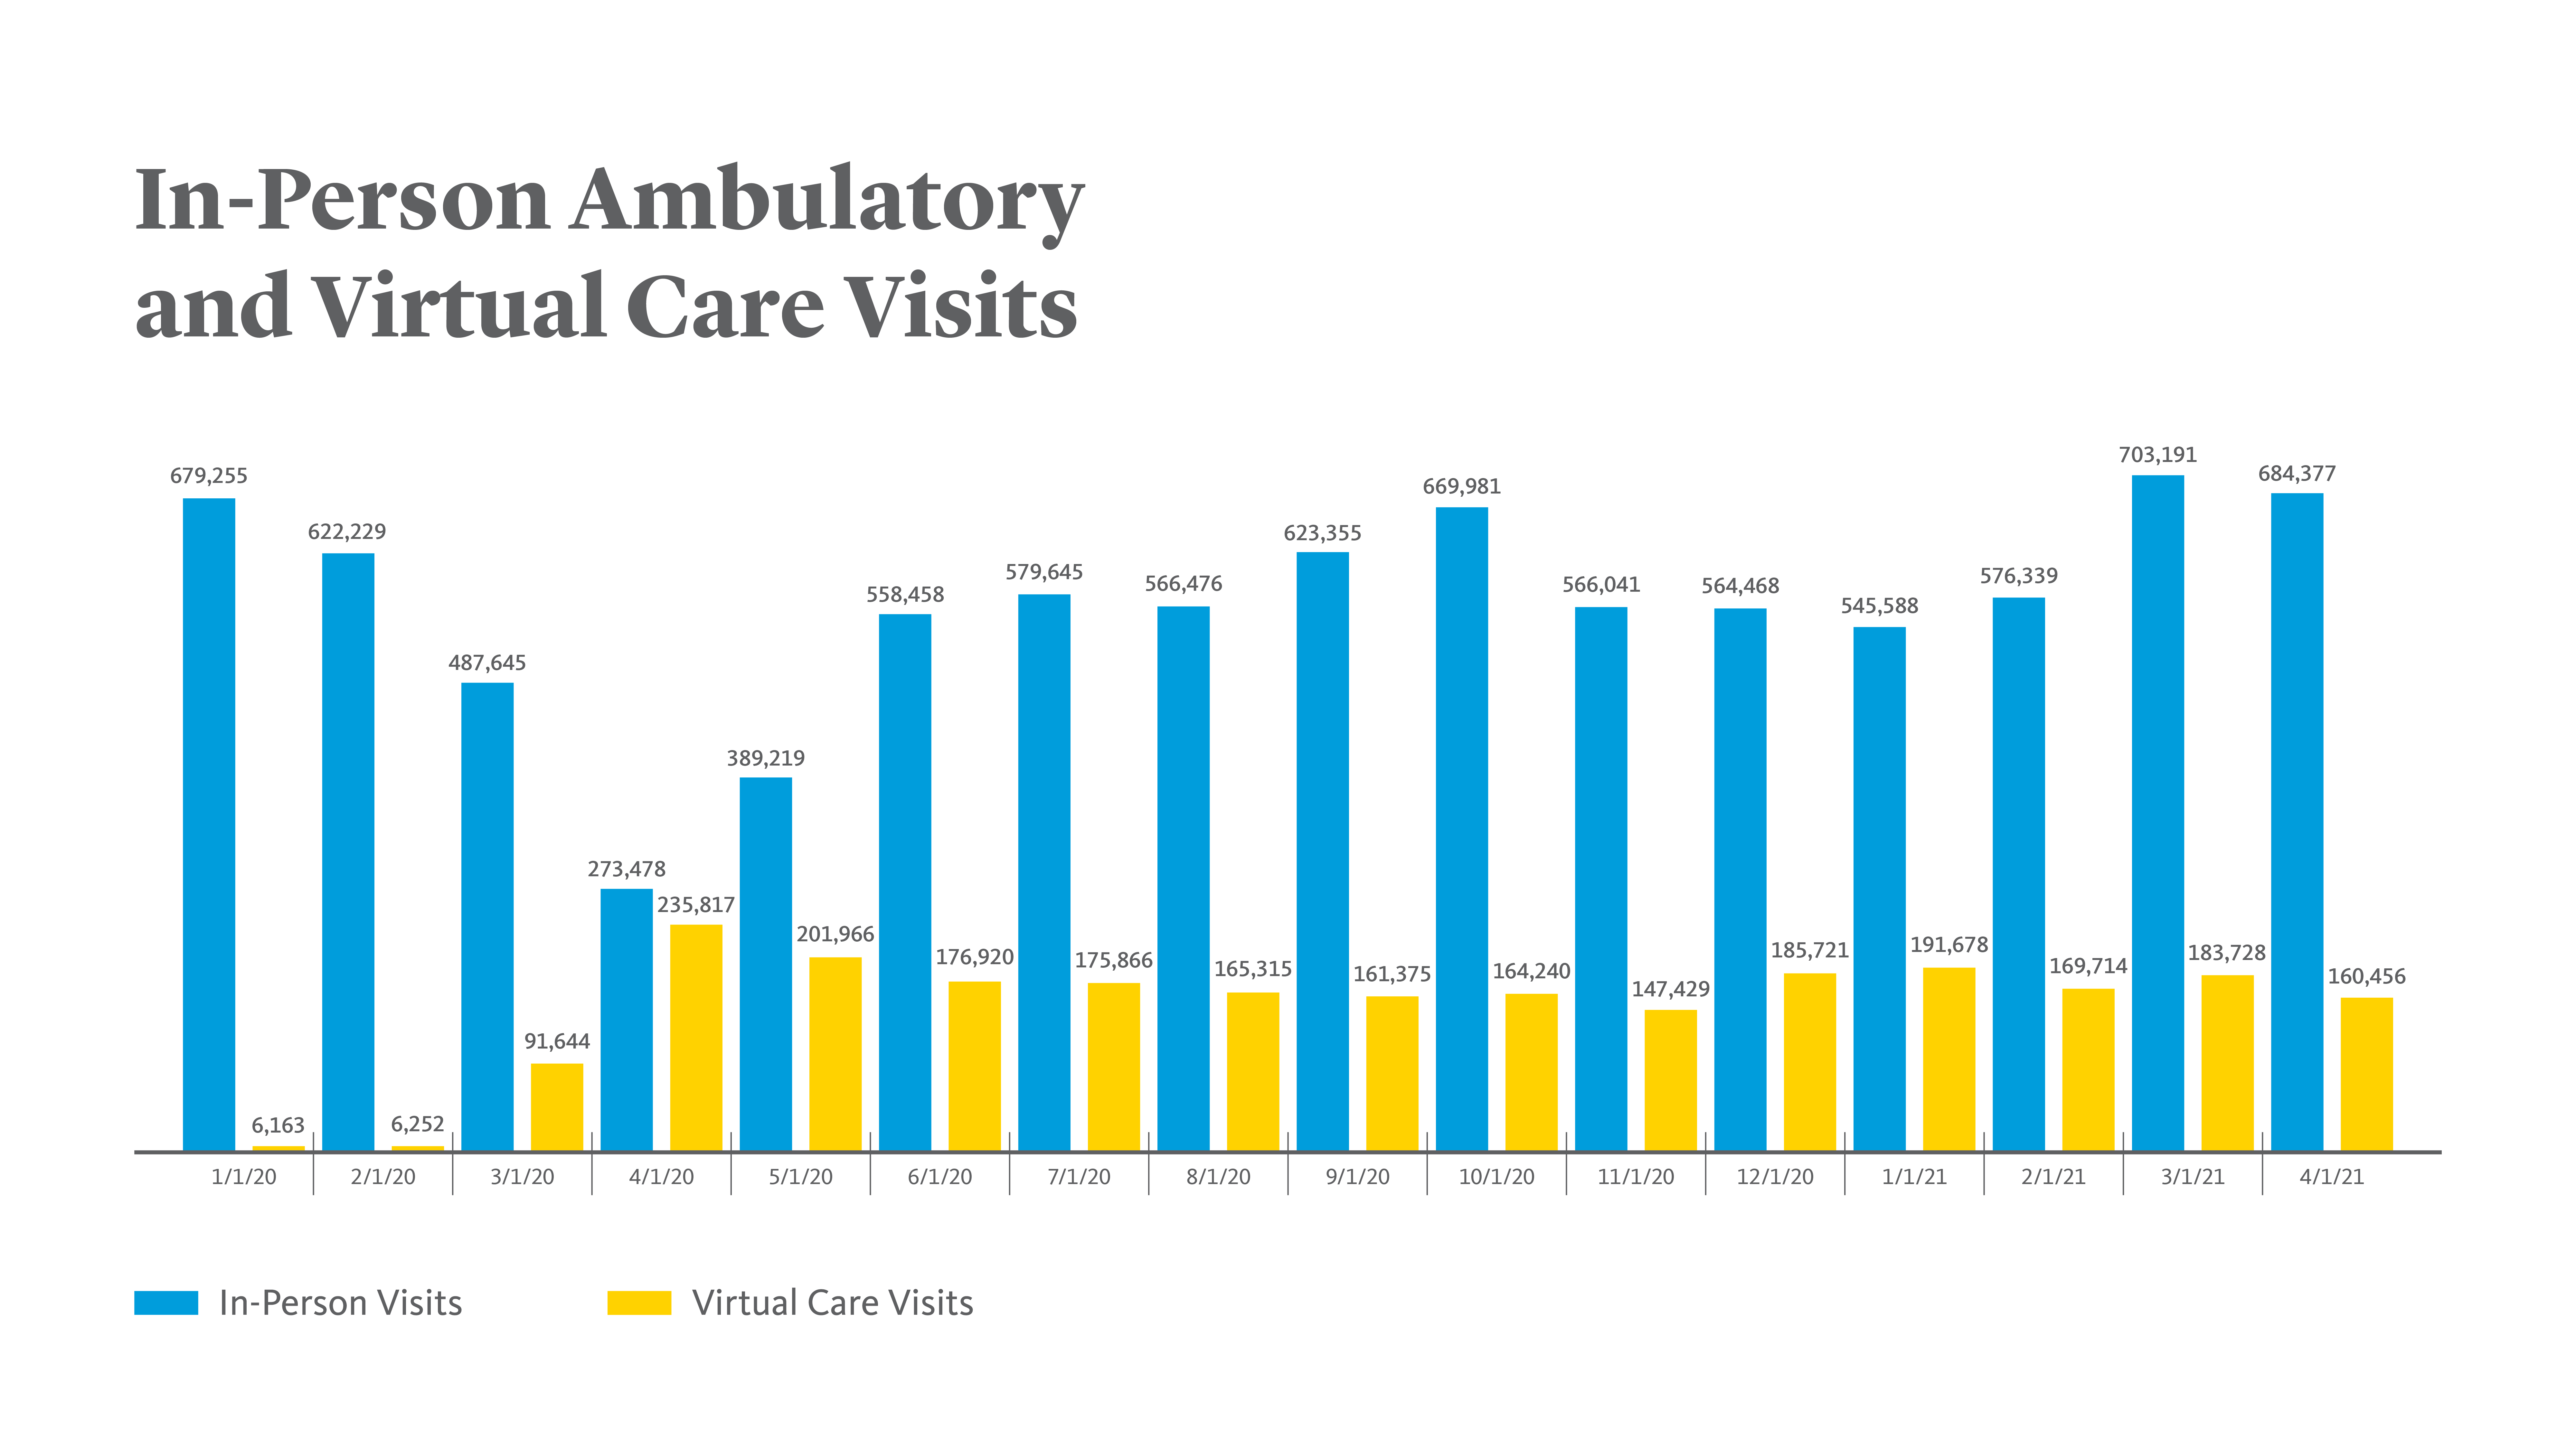 In-Person Ambulatory and Virtual Care Visits